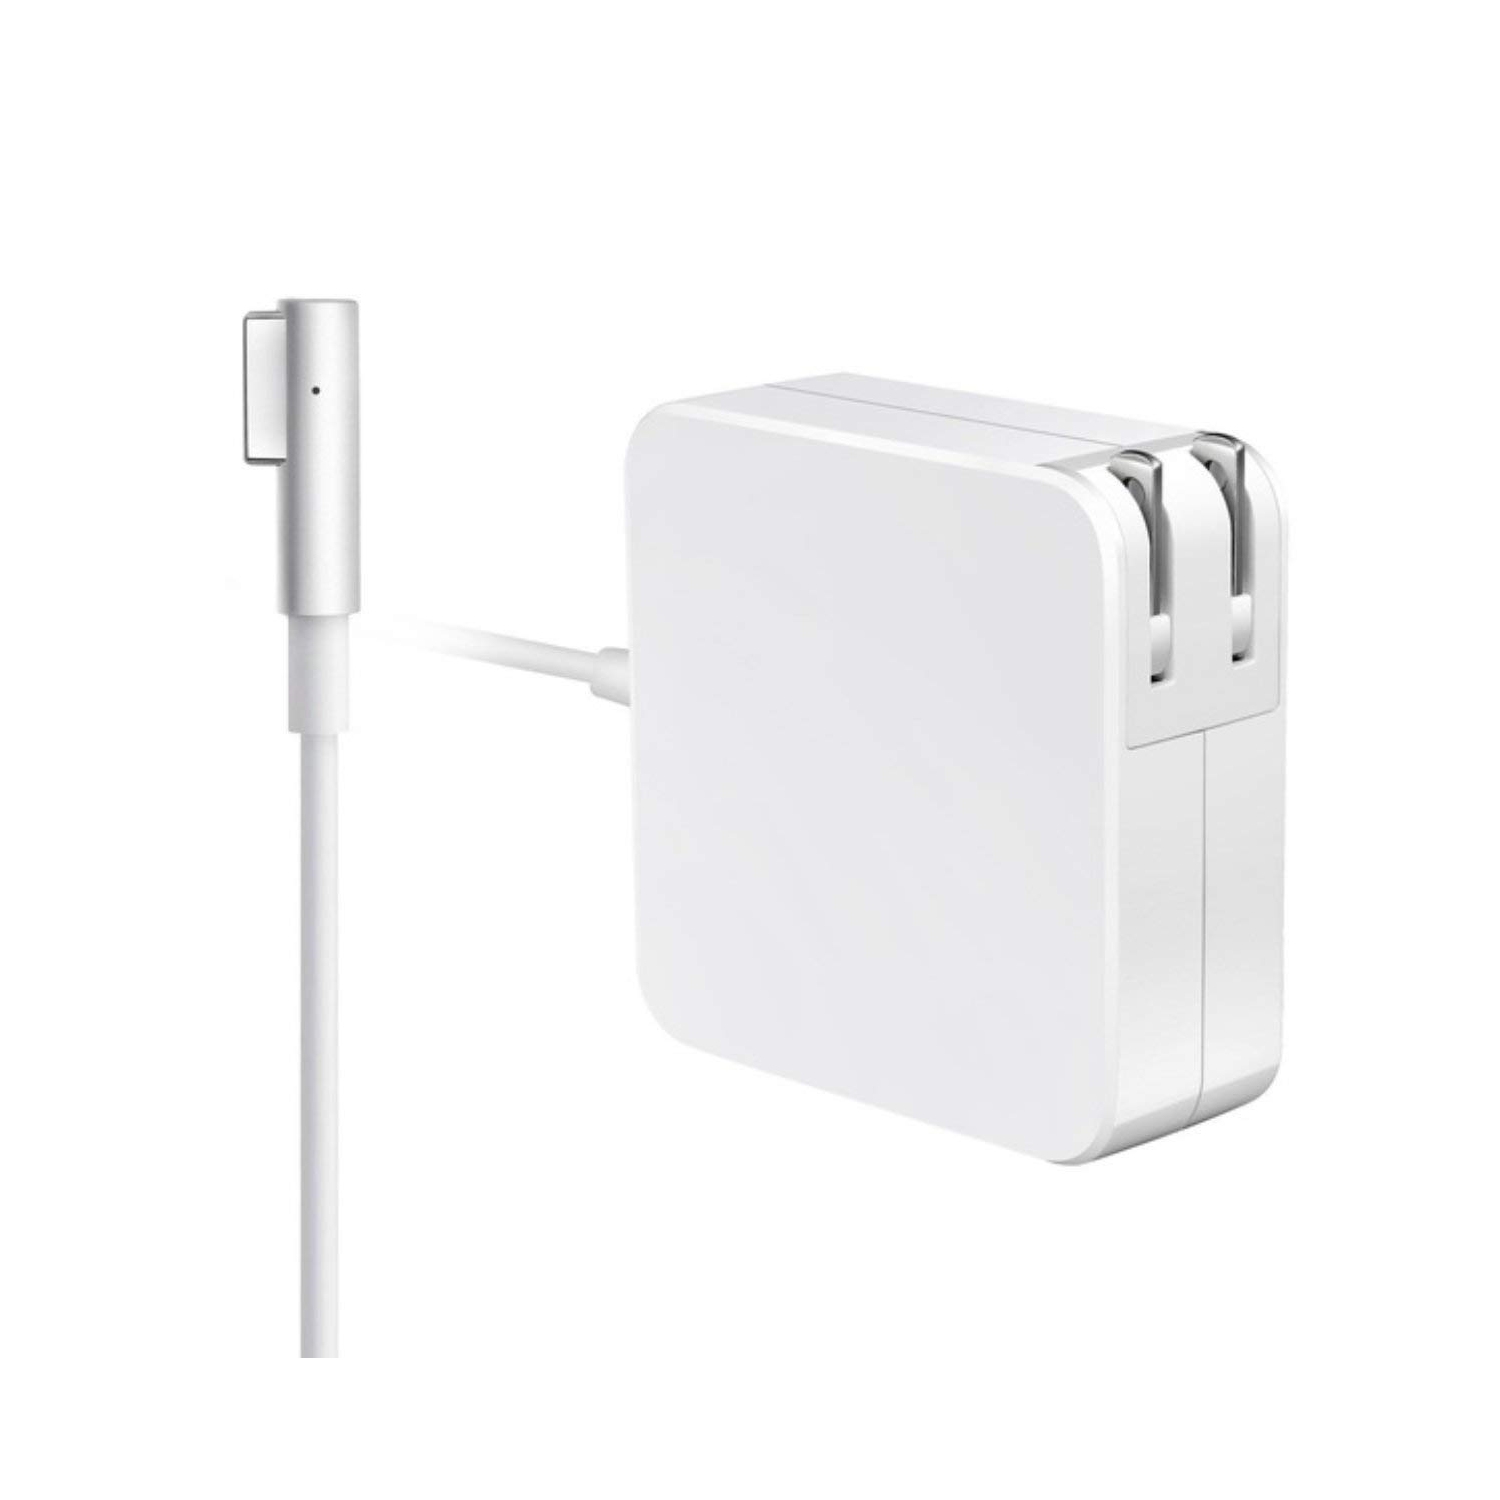 HYFAI Macbook Charger 60w L Tip Power Adapter for Apple Macbook Pro 13" 13.3" MC461LL/A from 2007 to 2012